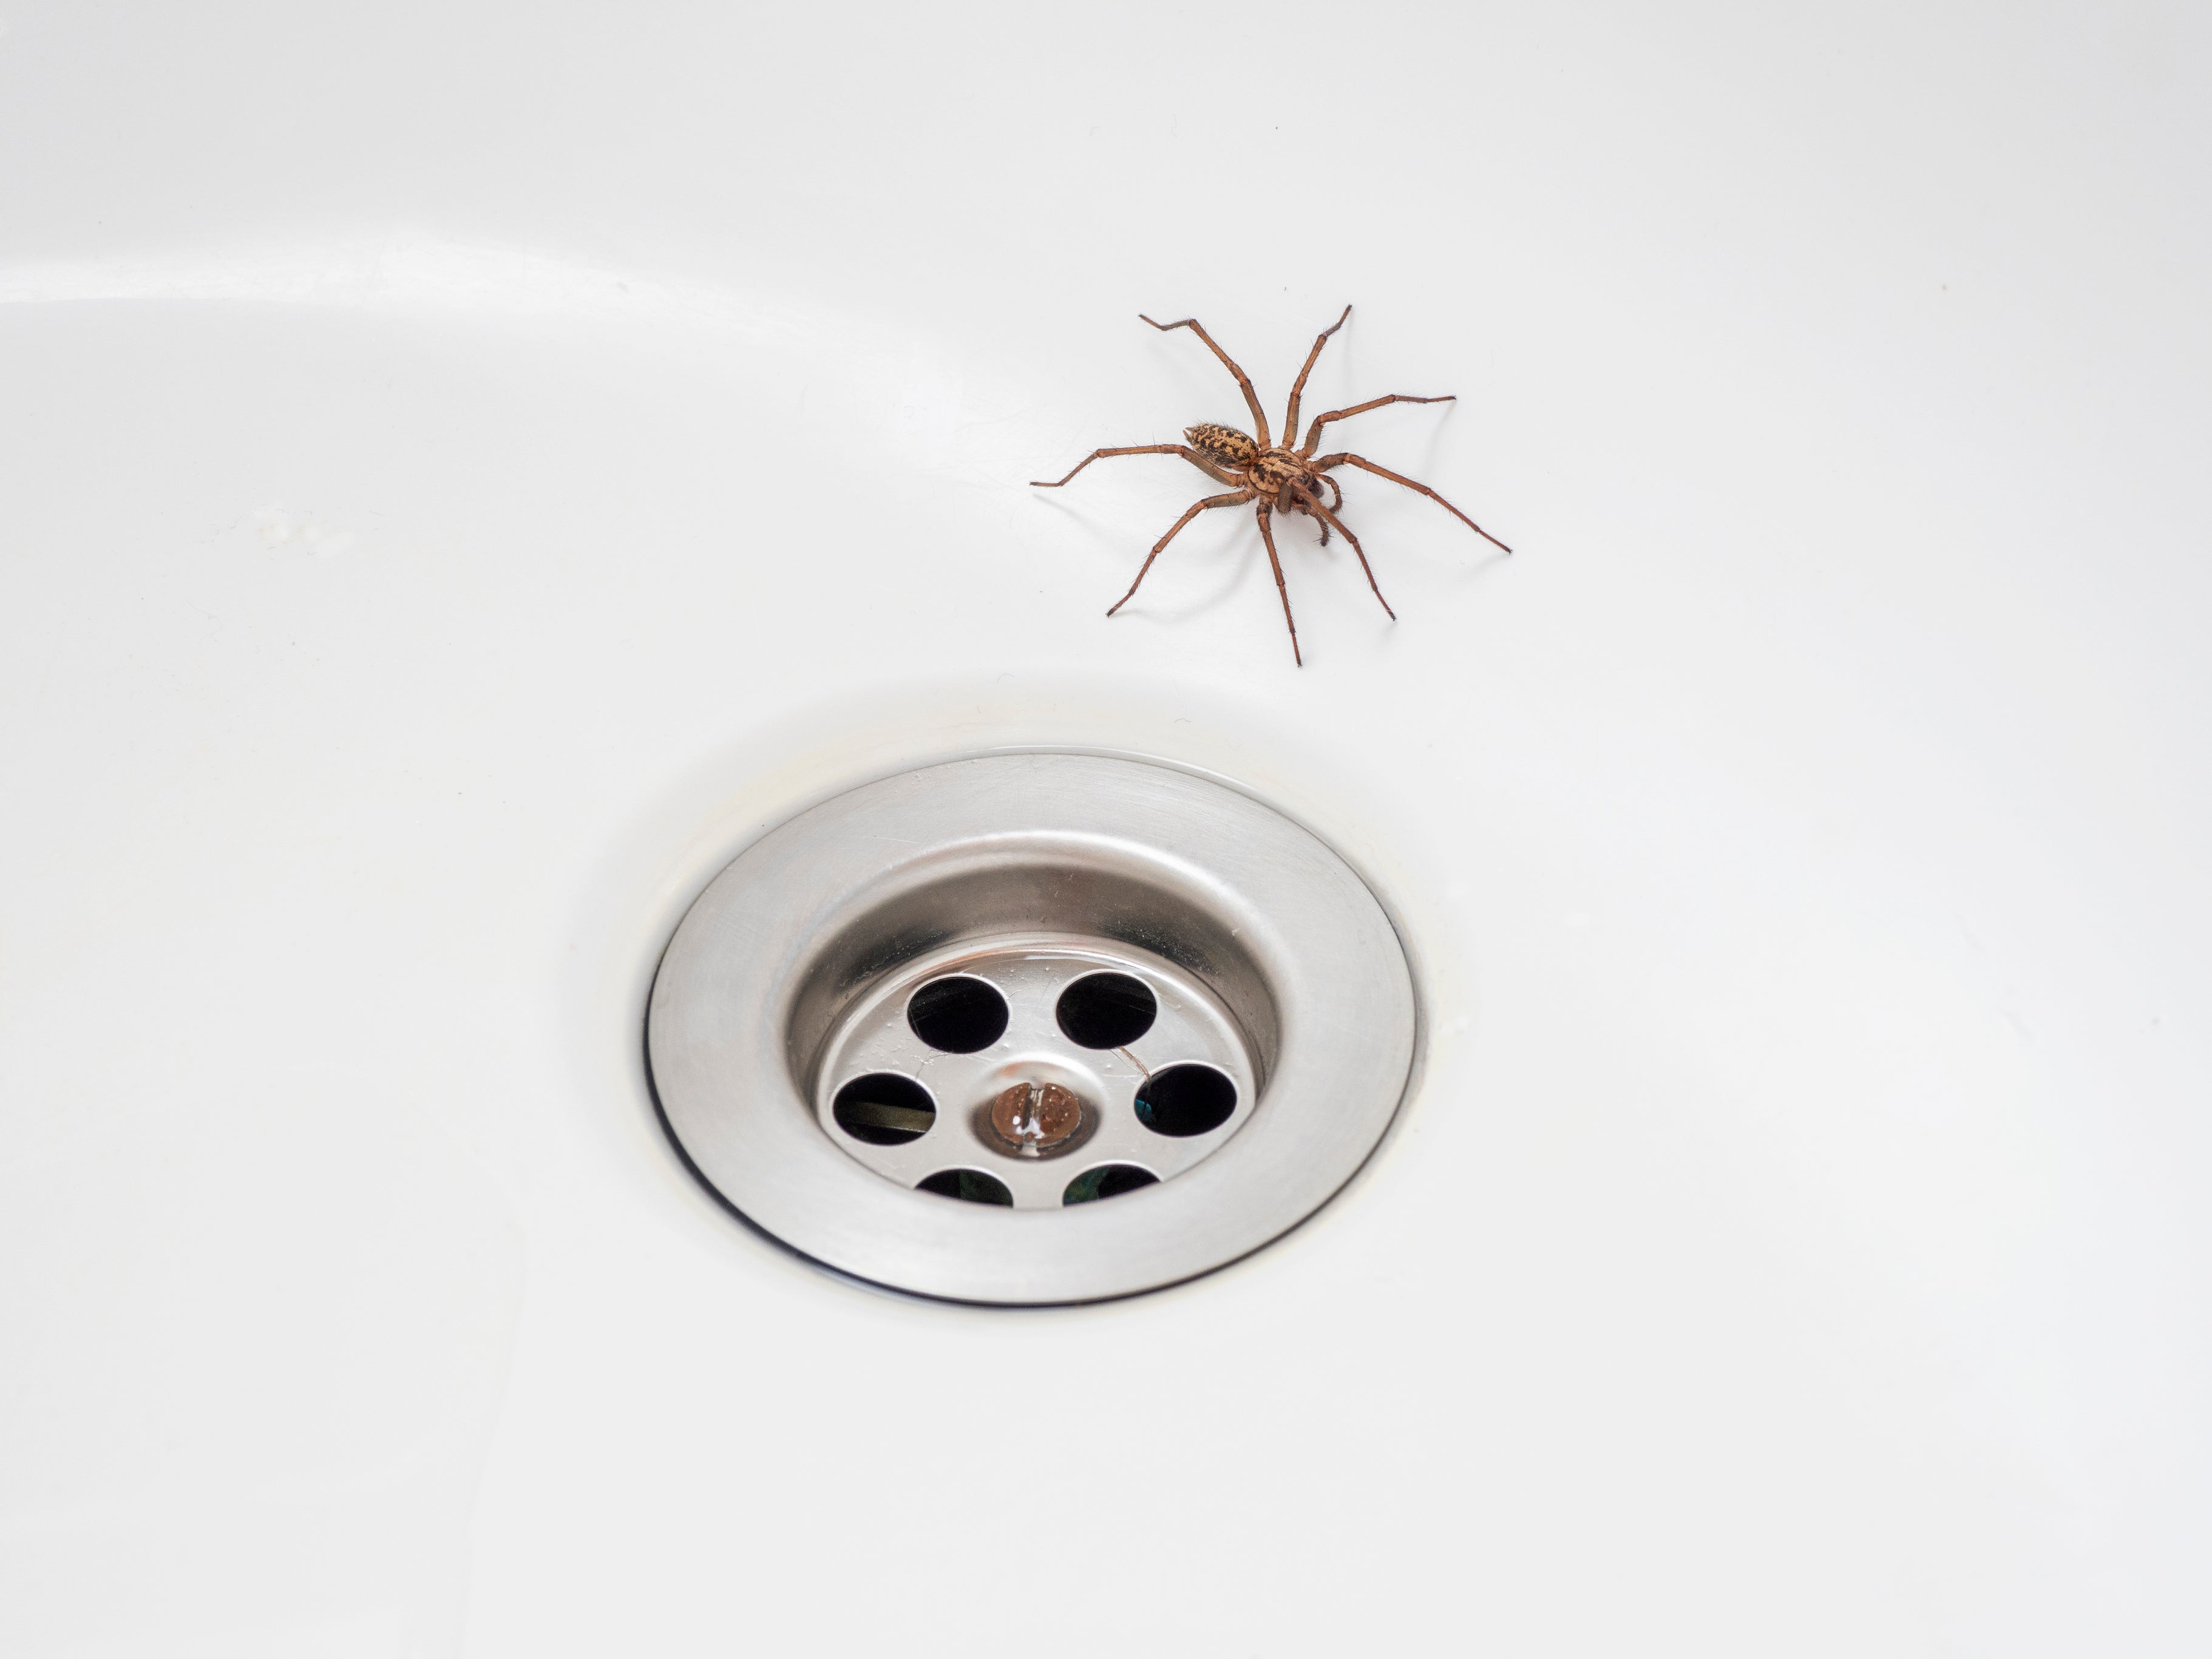 Spiders are not just trying to scare us when they appear in our homes